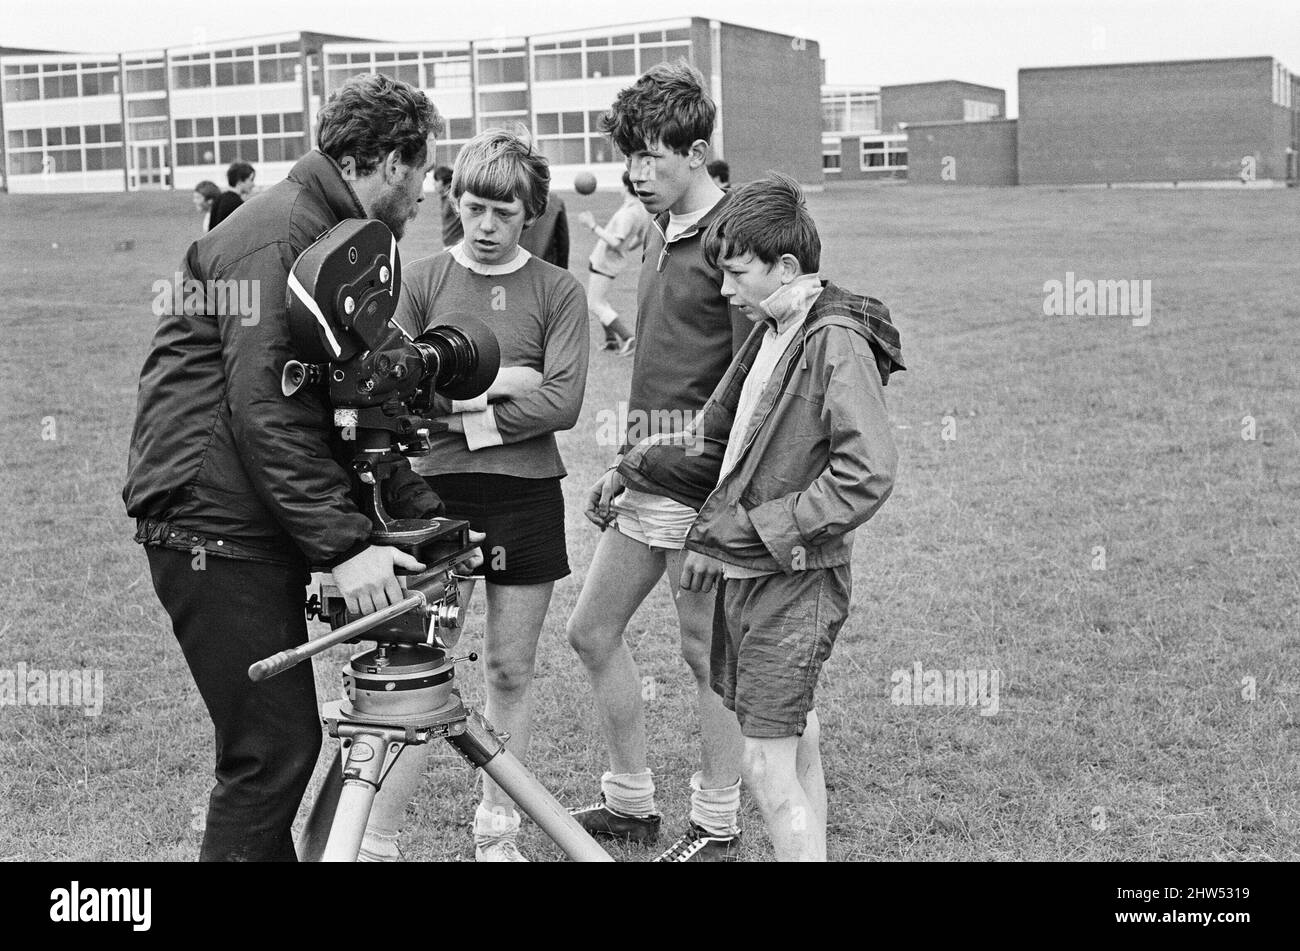 David Bradley (on the right), (aged 14) playing the part of Billy Casper, pictured with his Kestral, on the film set of the film Kes.   Here Billy Casper is talking to the film crew on the school playing film, during the famous football scene. Kes is a 1969 release drama film directed by Ken Loach and produced by Tony Garnett. The film is based on the 1968 novel A Kestrel for a Knave, written by the Barnsley-born author Barry Hines. The film is ranked seventh in the British Film Institute's Top Ten (British) Films and among the top ten in its list of the 50 films you should see by the age of 1 Stock Photo